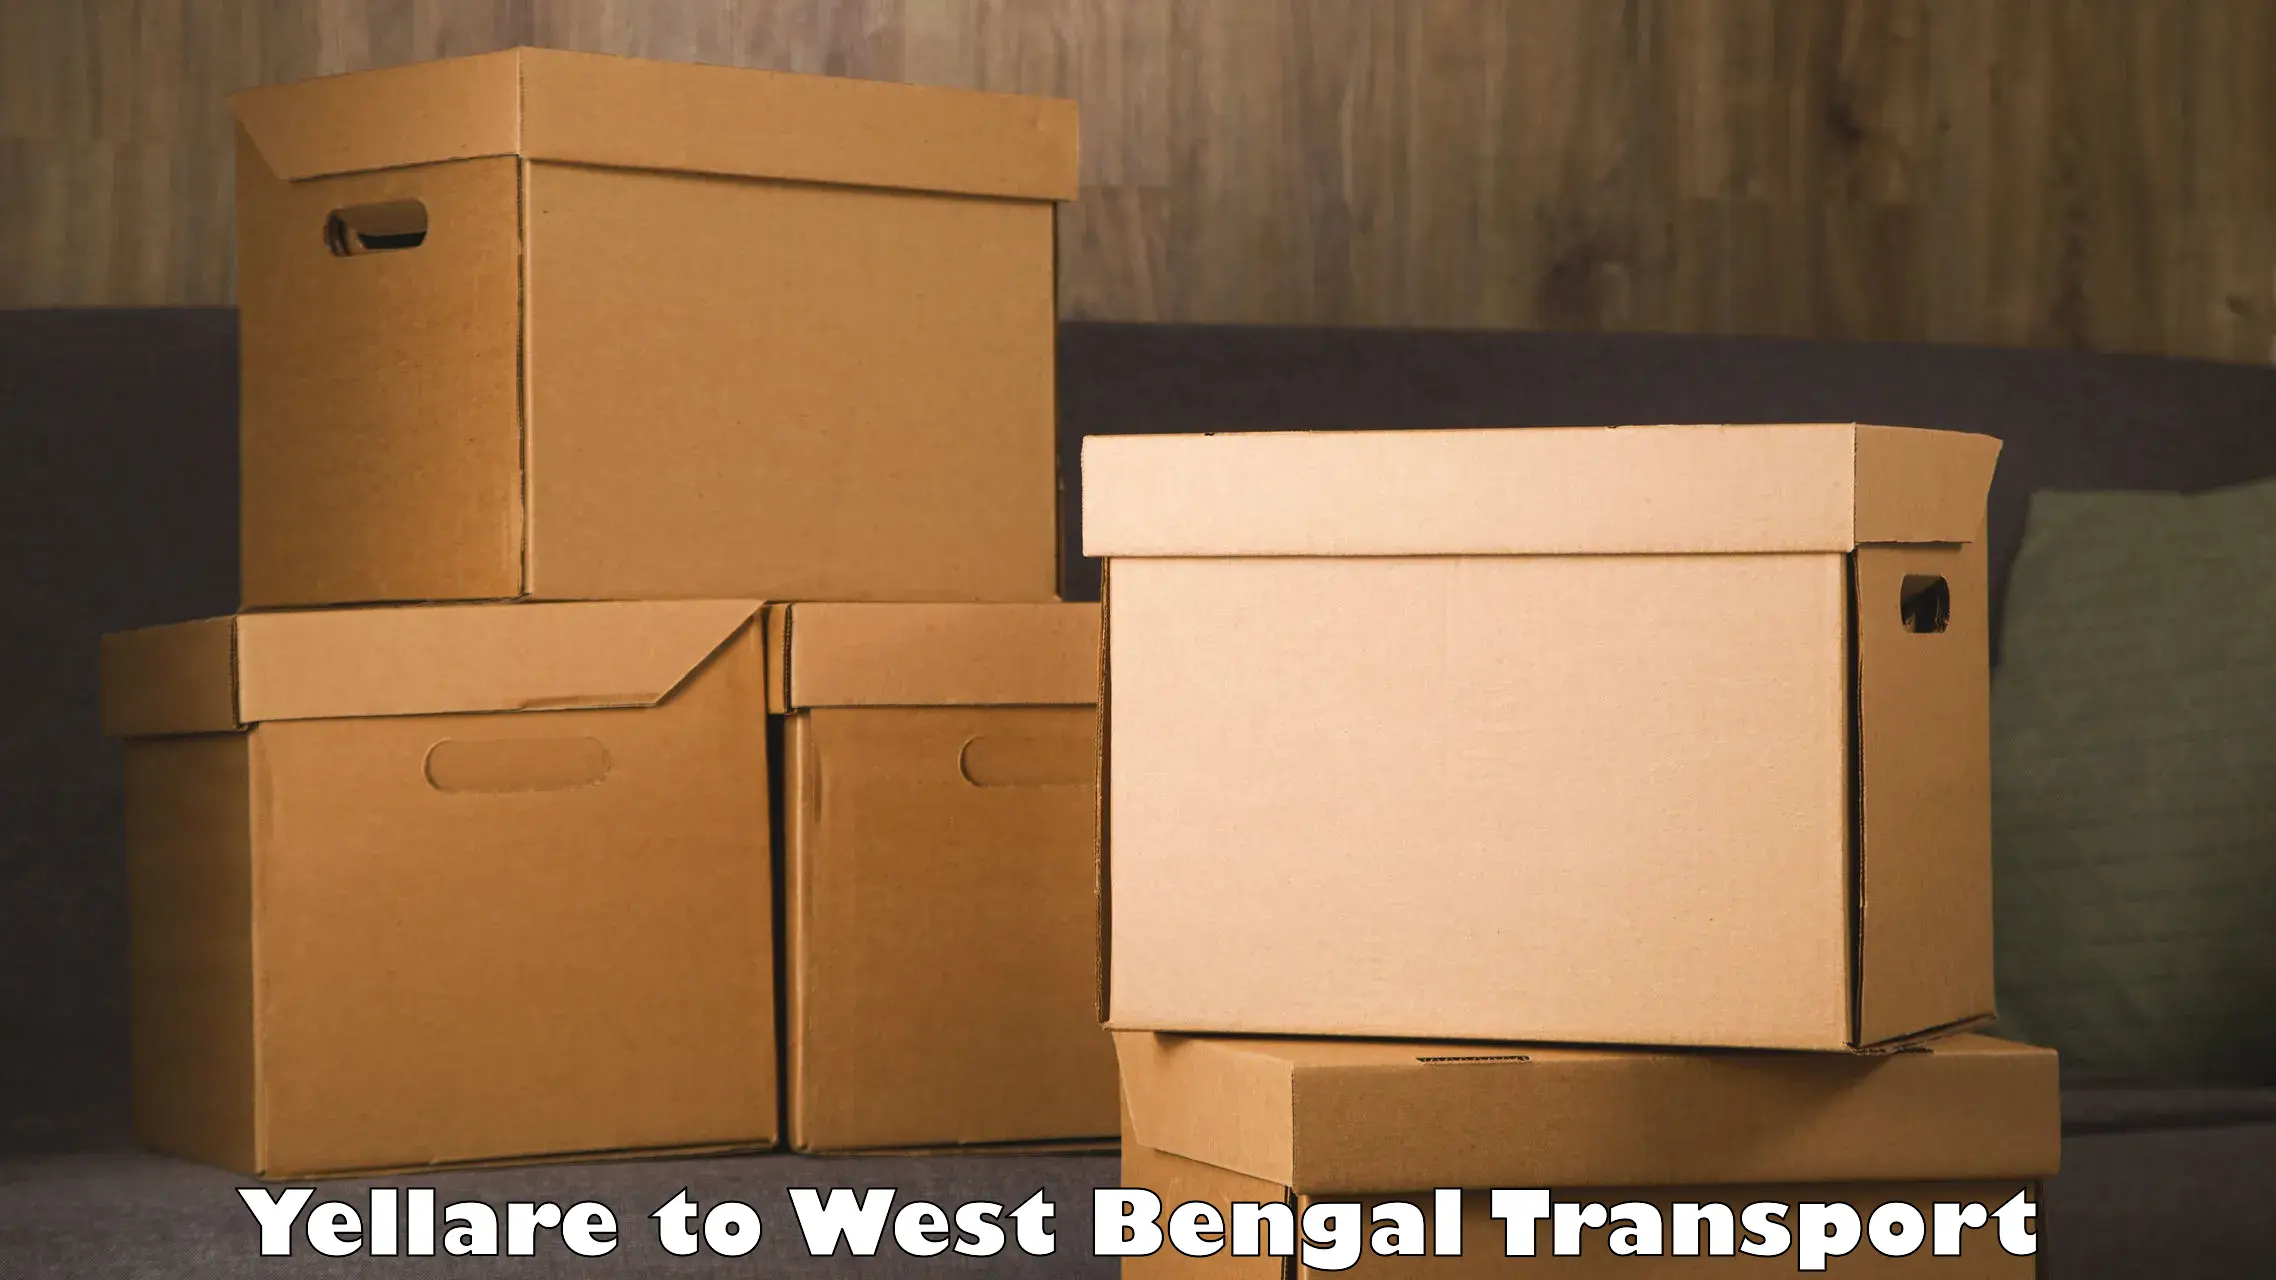 Online transport service Yellare to West Bengal